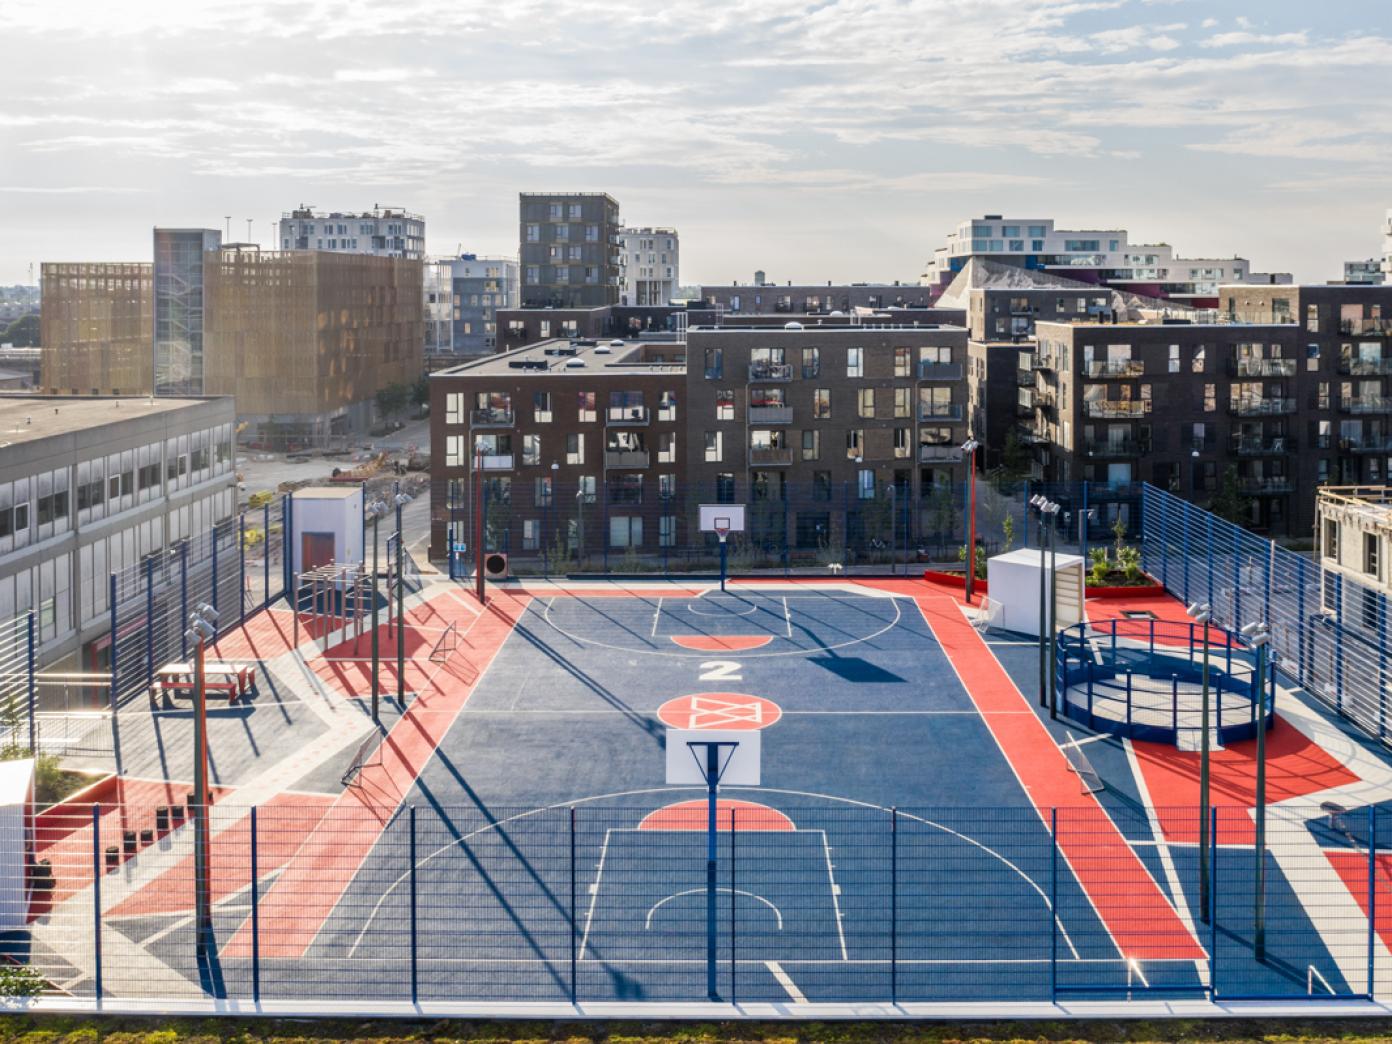 Basketball court and activity equipment on the roof of a building in the Copenhagen neighbourhood Ørestad in West Amager